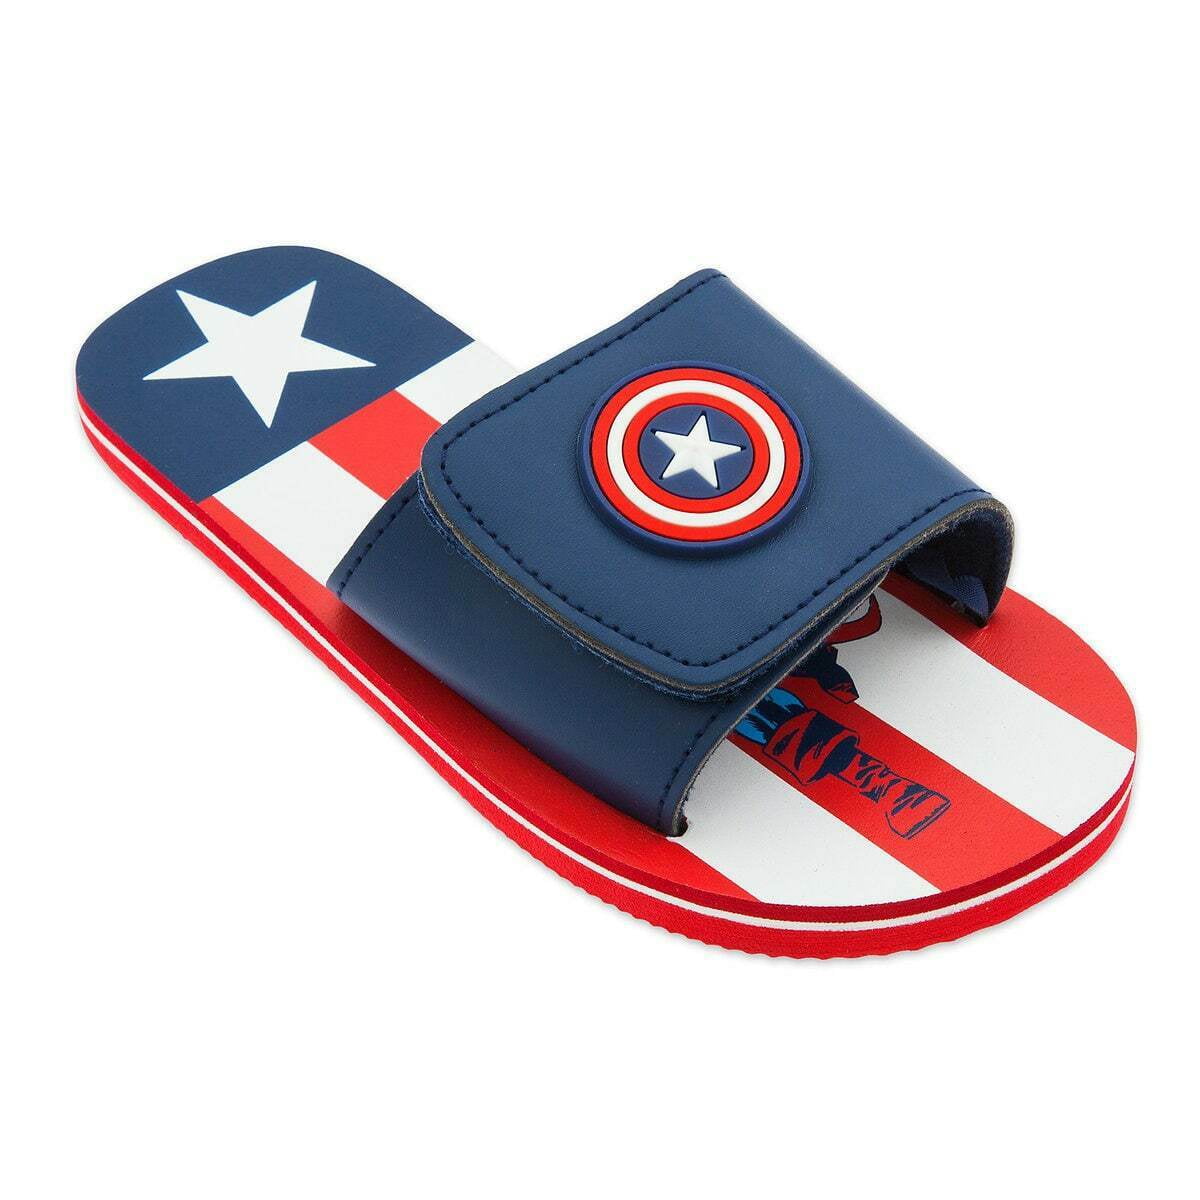 BOYS' CLOGS SANDALS 'CAPTAIN AMERICA ZY DELICIOUS', BLUE/RED